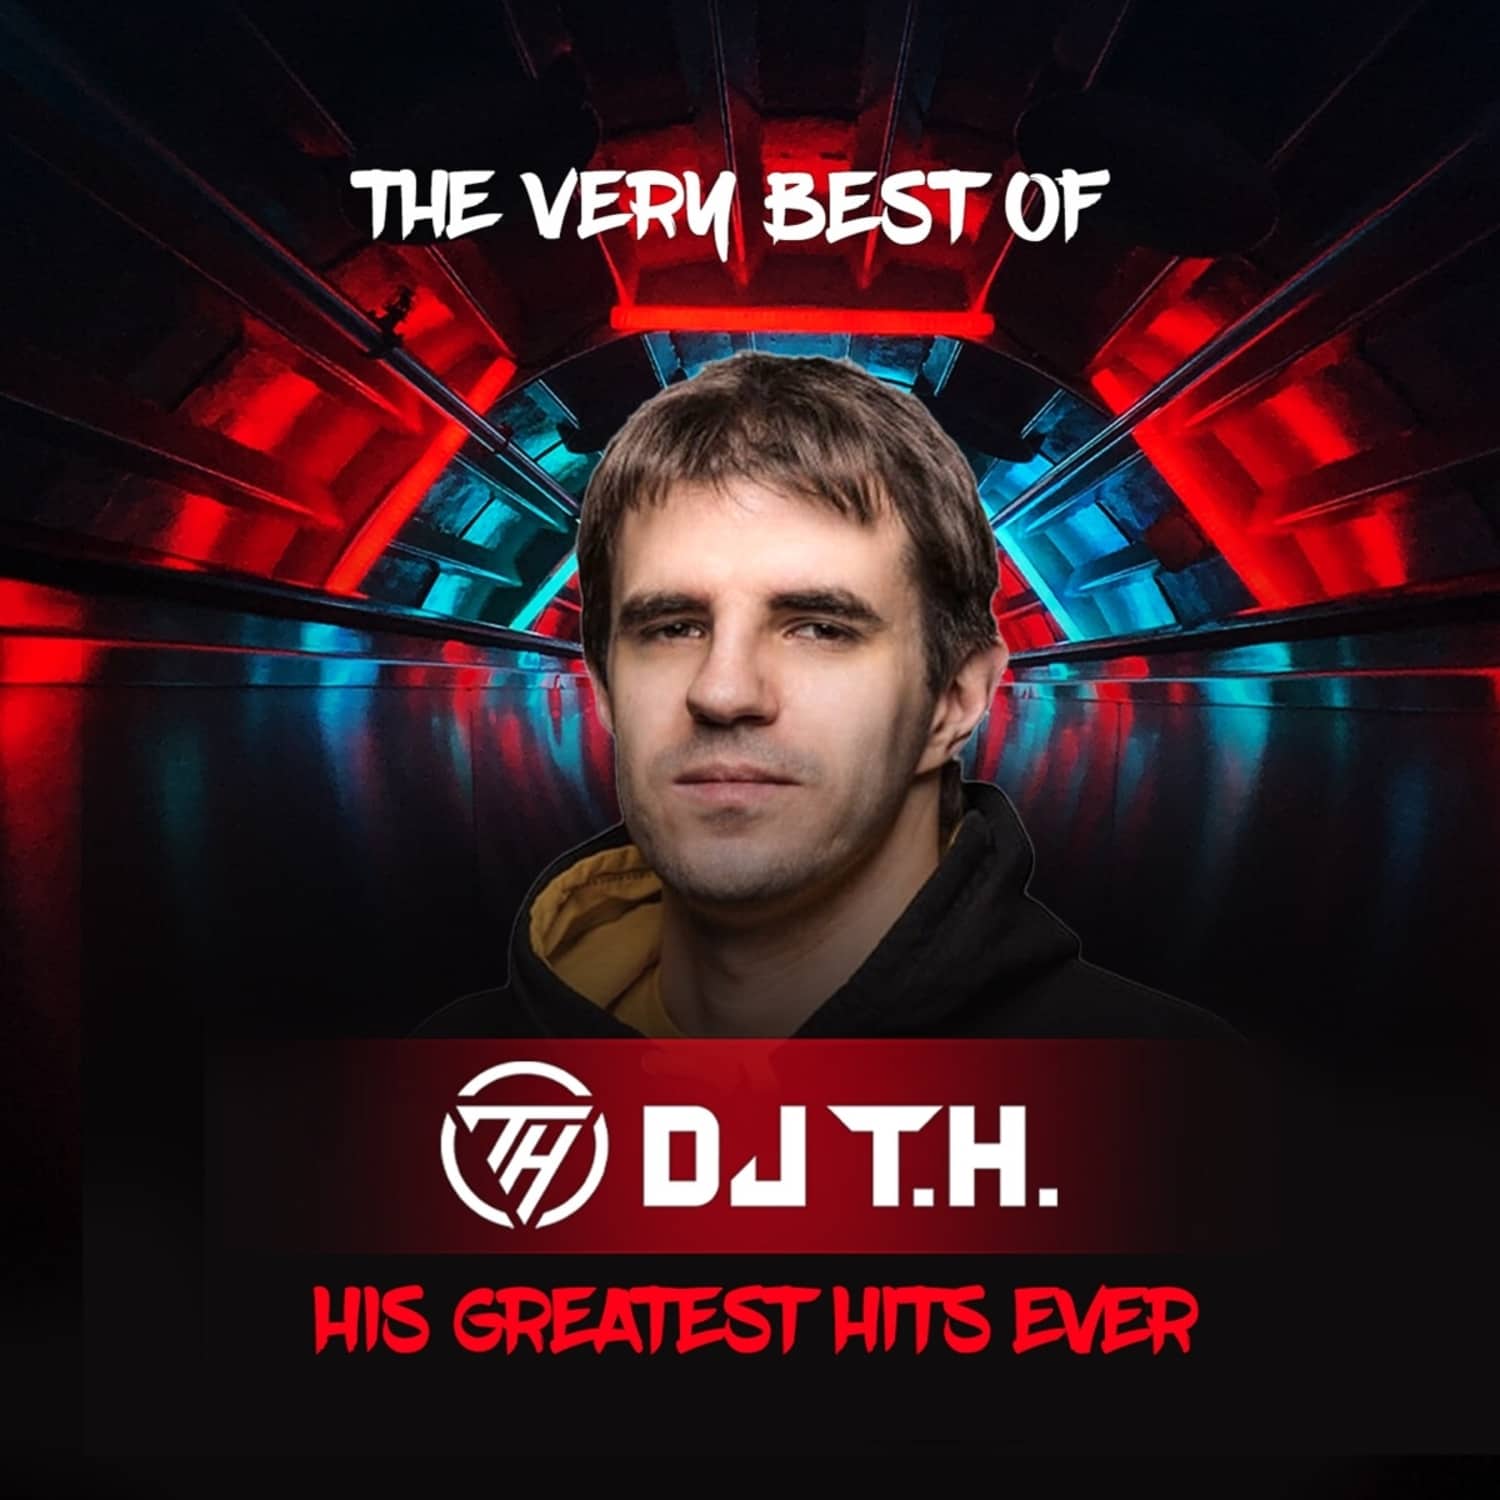 DJ T.H. - THE VERY BEST OF DJ T.H.-HIS GREATEST HITS EVER 